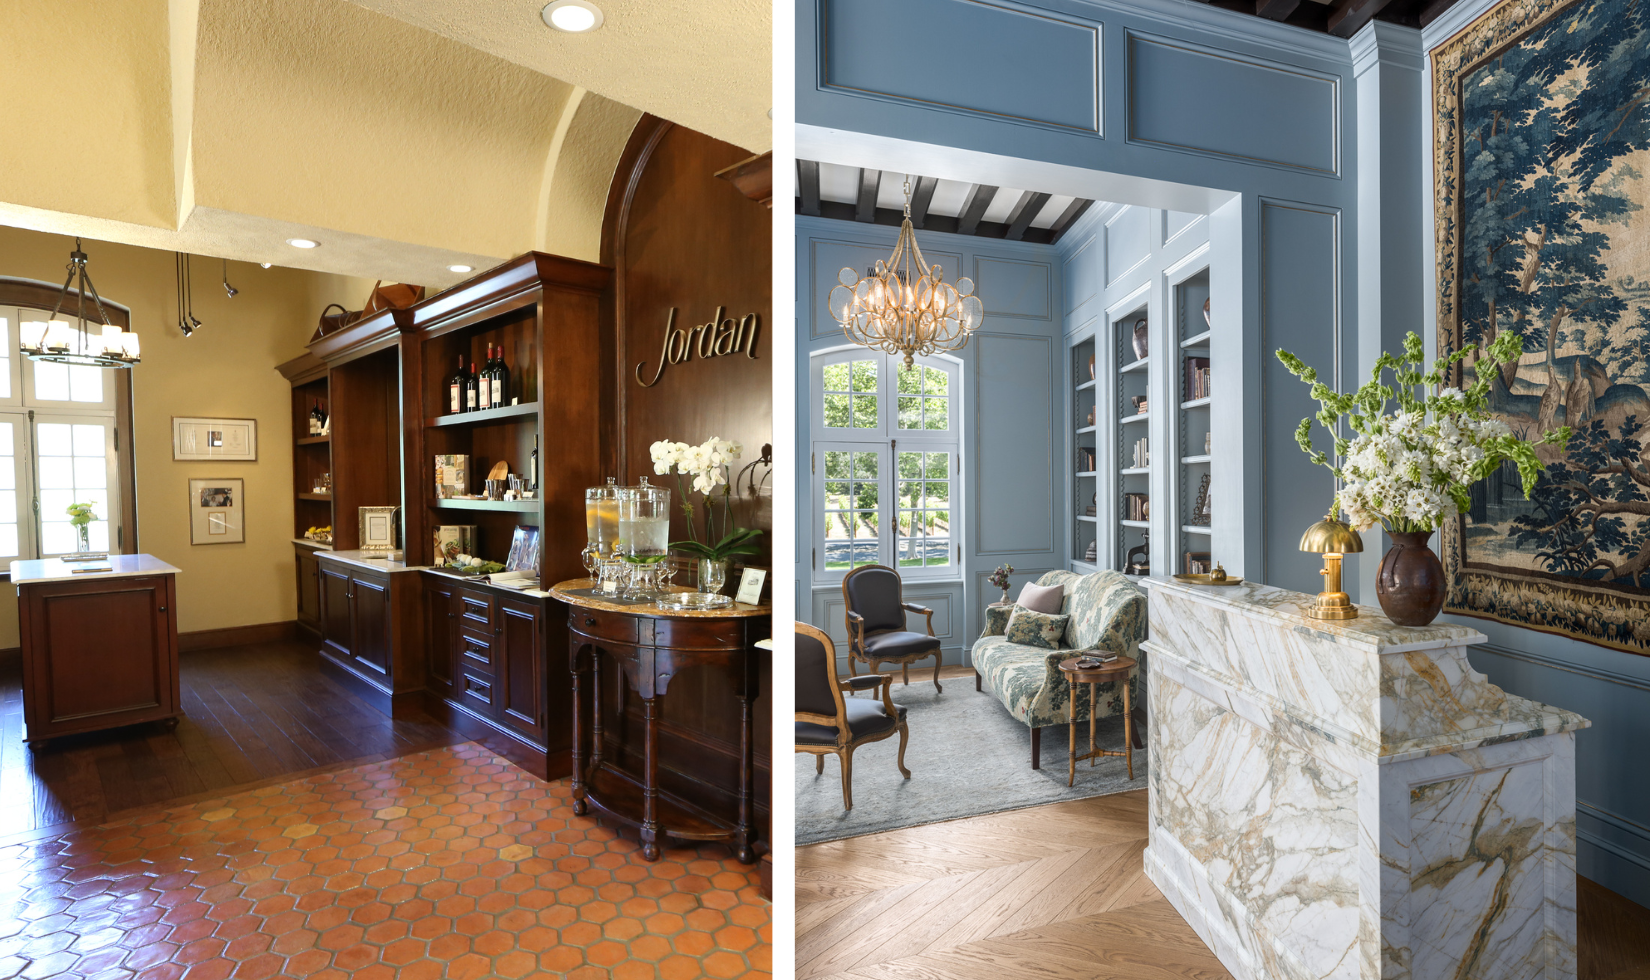 before and after photos of Jordan Winery Lobby Retail. Left photo includes wooden cabinets filled with wine bottles and retail items and the right photo has marble concierge desk with blue walls and tapestry